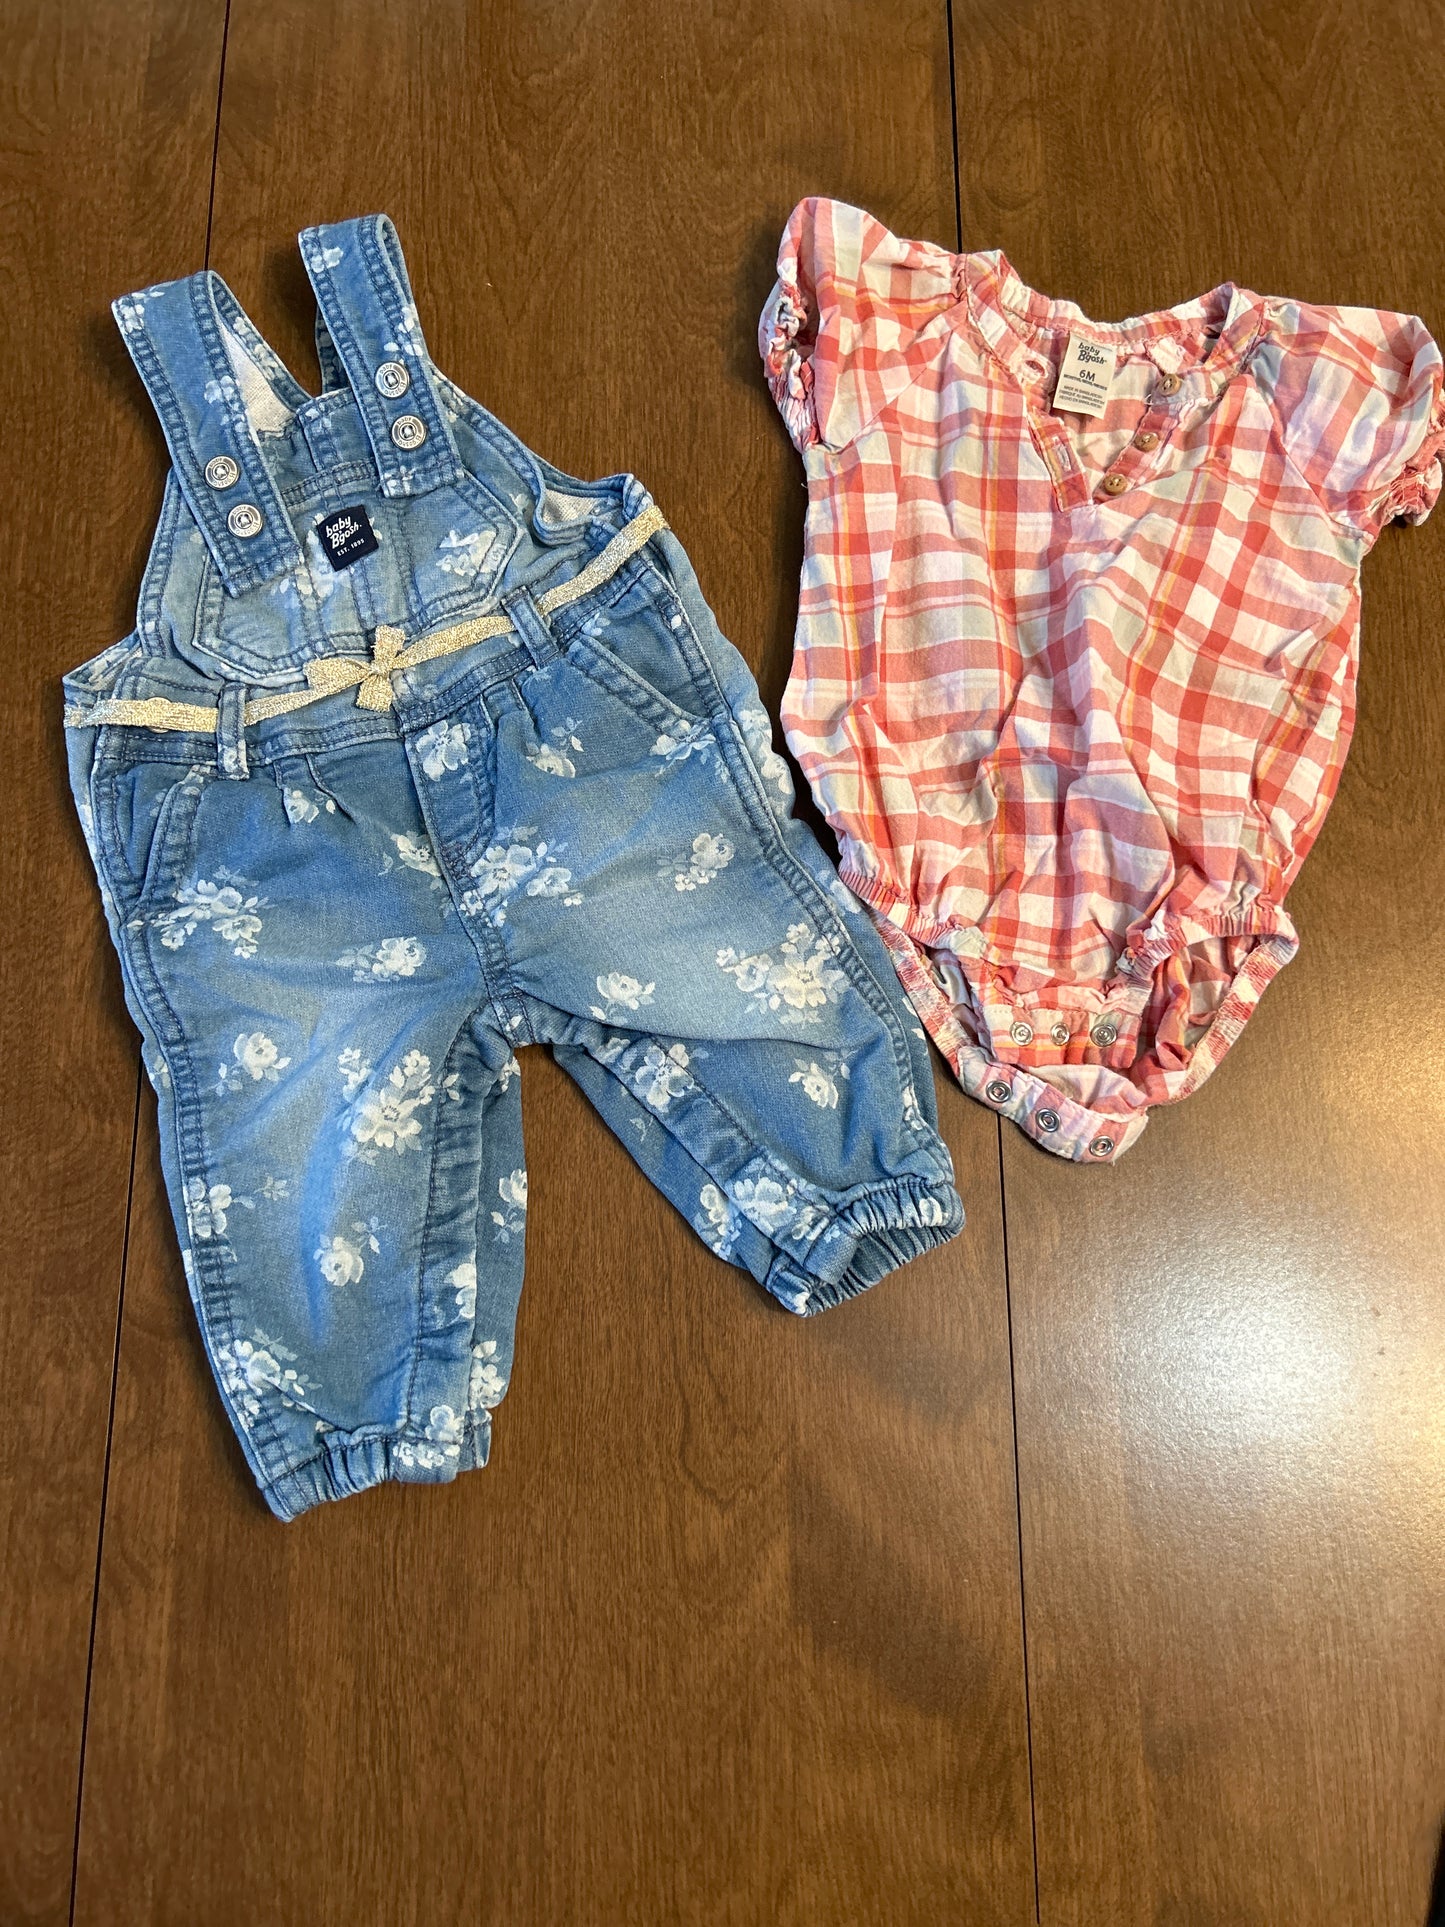 **REDUCED** Baby B’gosh outfit girls